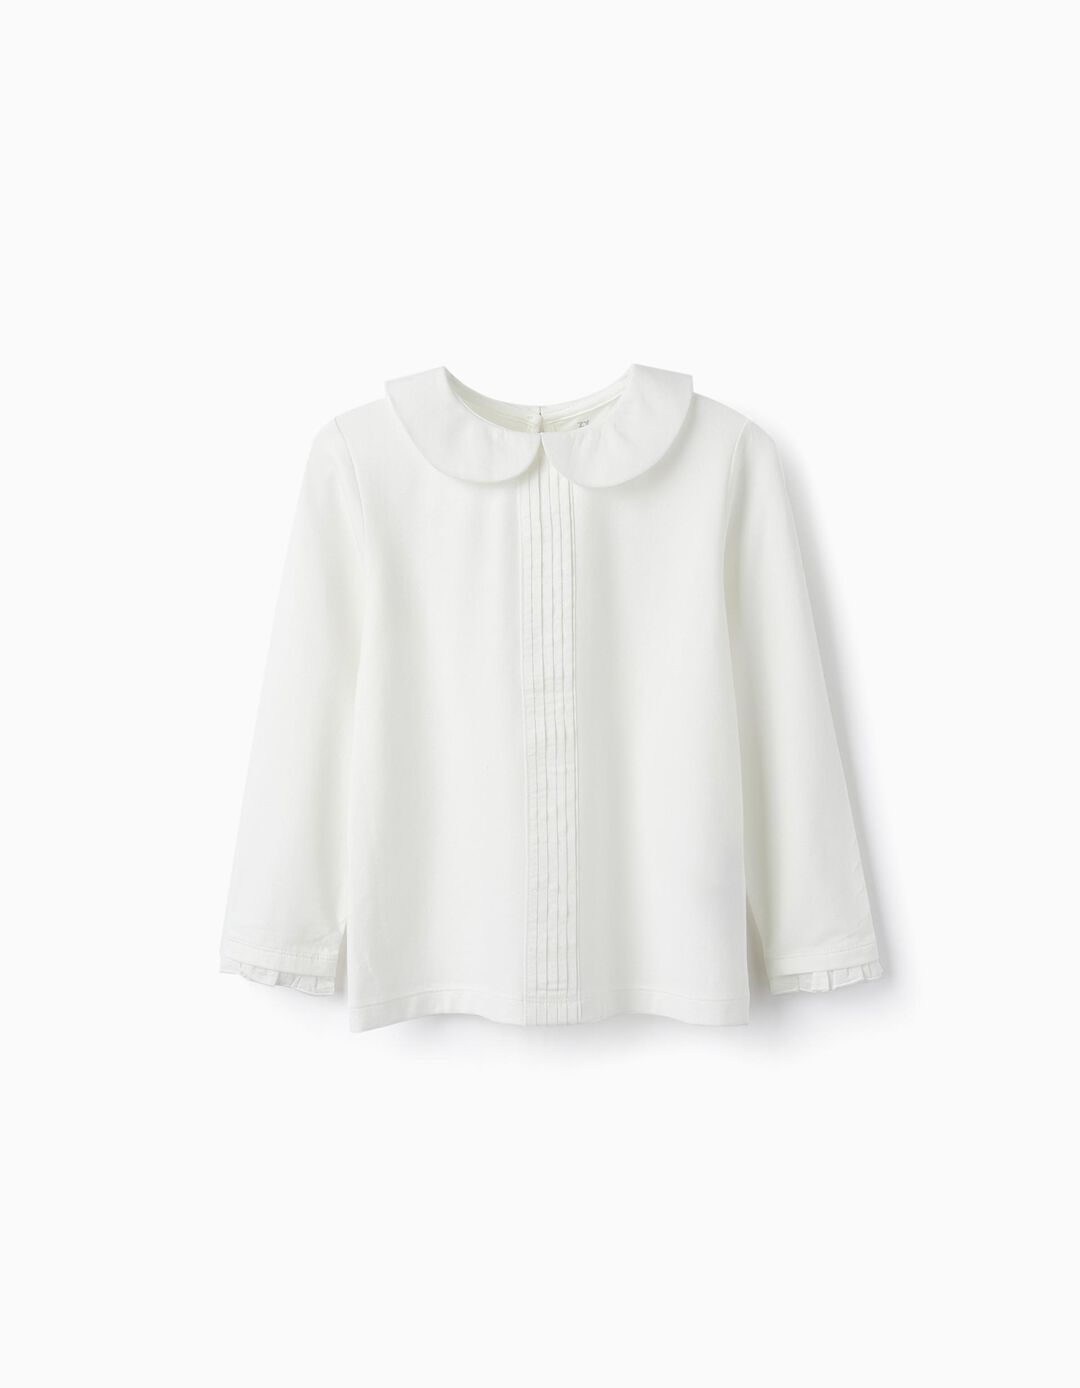 Long Sleeve Cotton T-Shirt with Ruffles for Girls, White